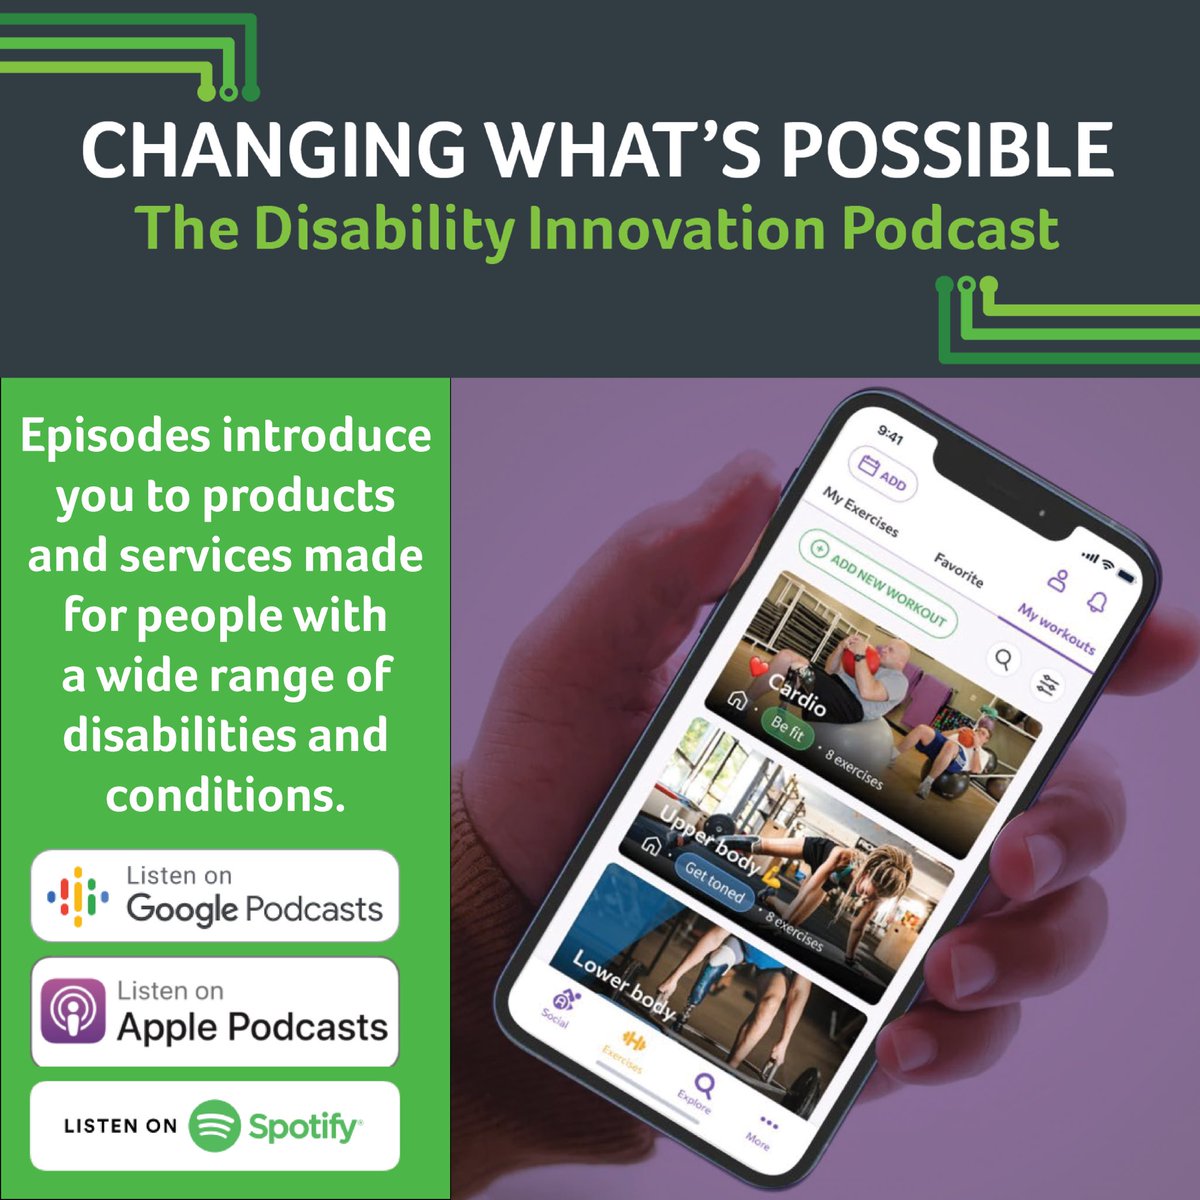 Have you checked out our #podcast? Each episode introduces you to products & services made with and for people with disabilities! Find our show on Apple, Spotify & Google Podcasts and download a few episodes that spark your interest. 🎧bit.ly/CPARFPodcast #disability